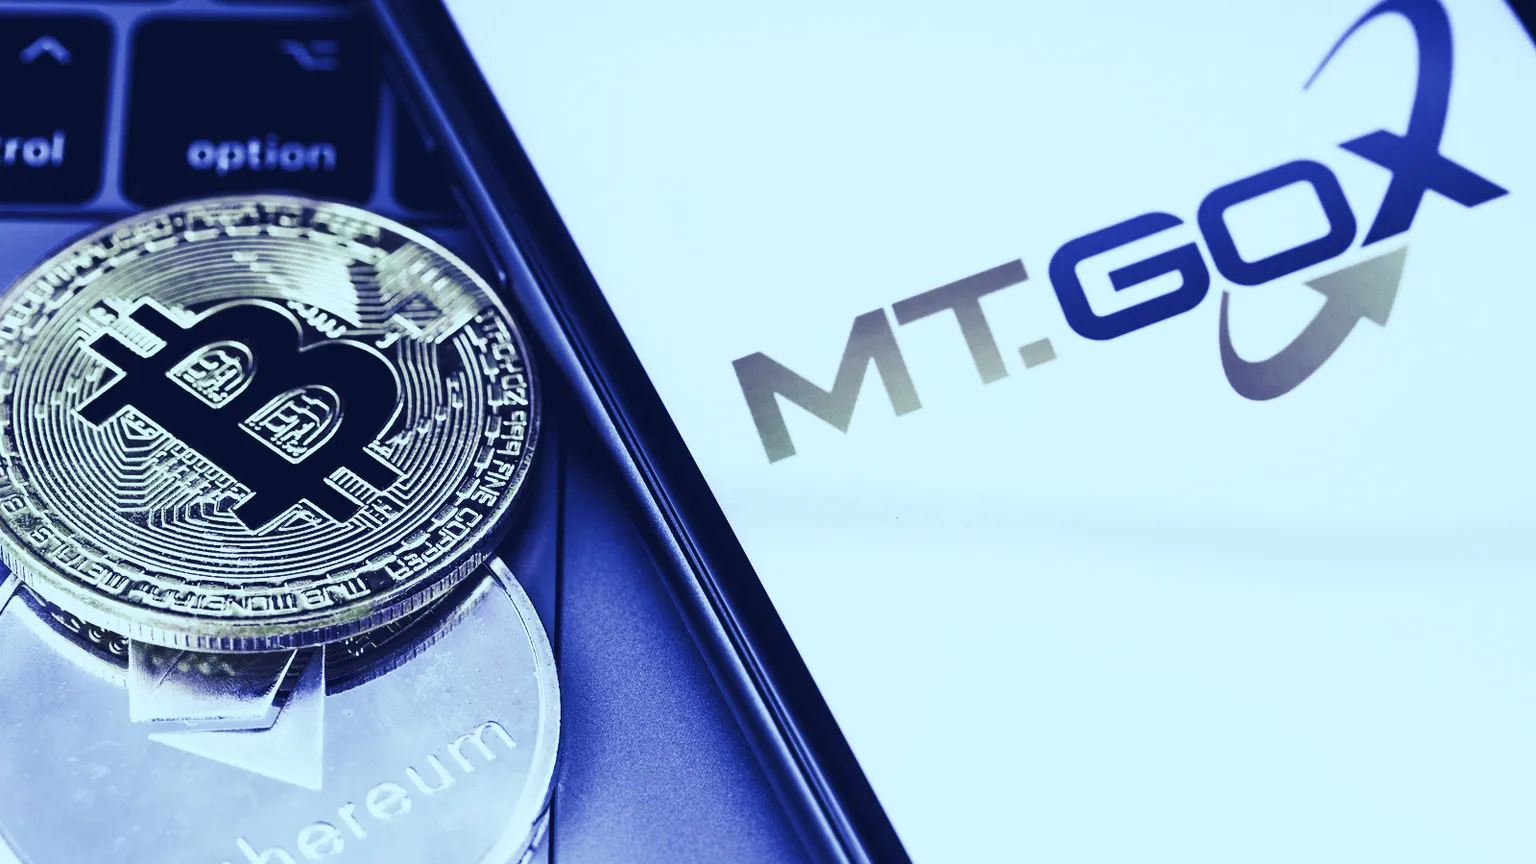 Mt. Gox CEO’s appeal thrown out in court. Image: Shutterstock